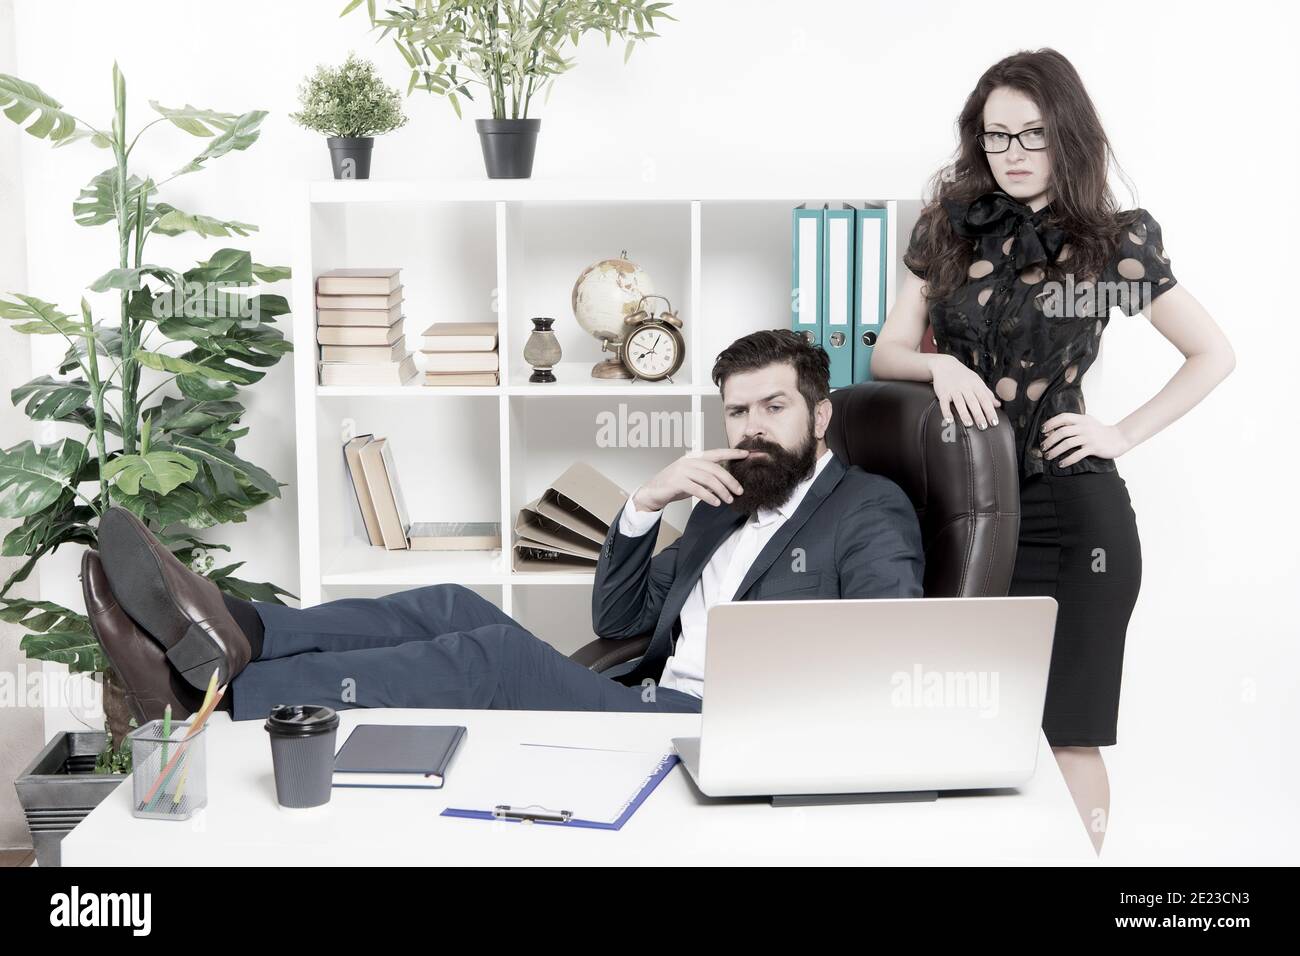 Typical office life. Man bearded hipster boss sit in leather armchair office interior. Boss and secretary girl at workplace. Relations at work. Business people and staff concept. Lazy boss office. Stock Photo